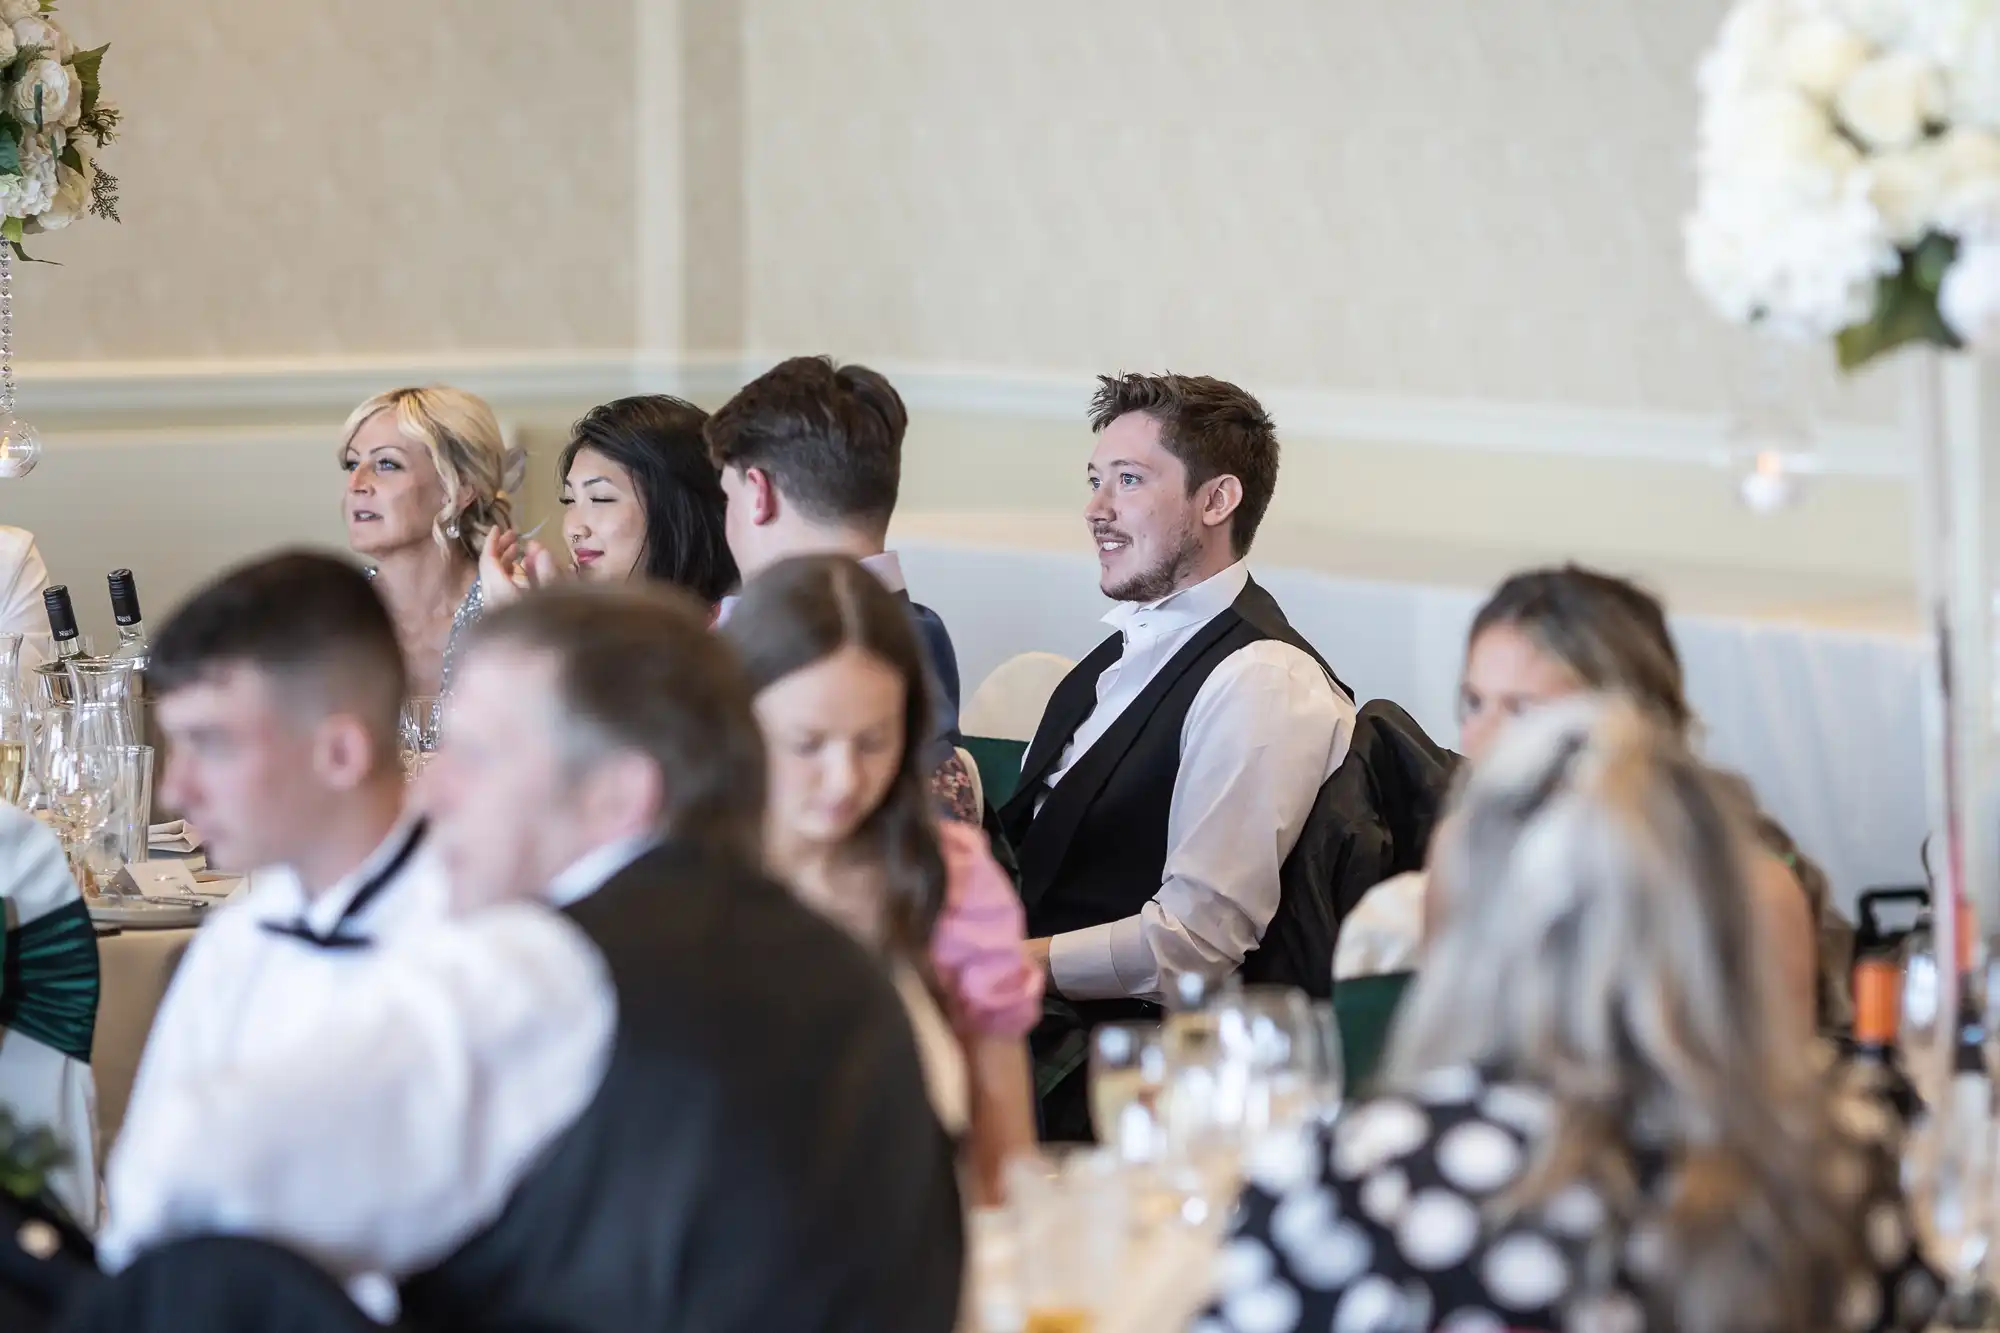 A group of guests at a wedding reception, seated at a table and engaged in conversation, with a focus on a man in a vest looking away from the camera.